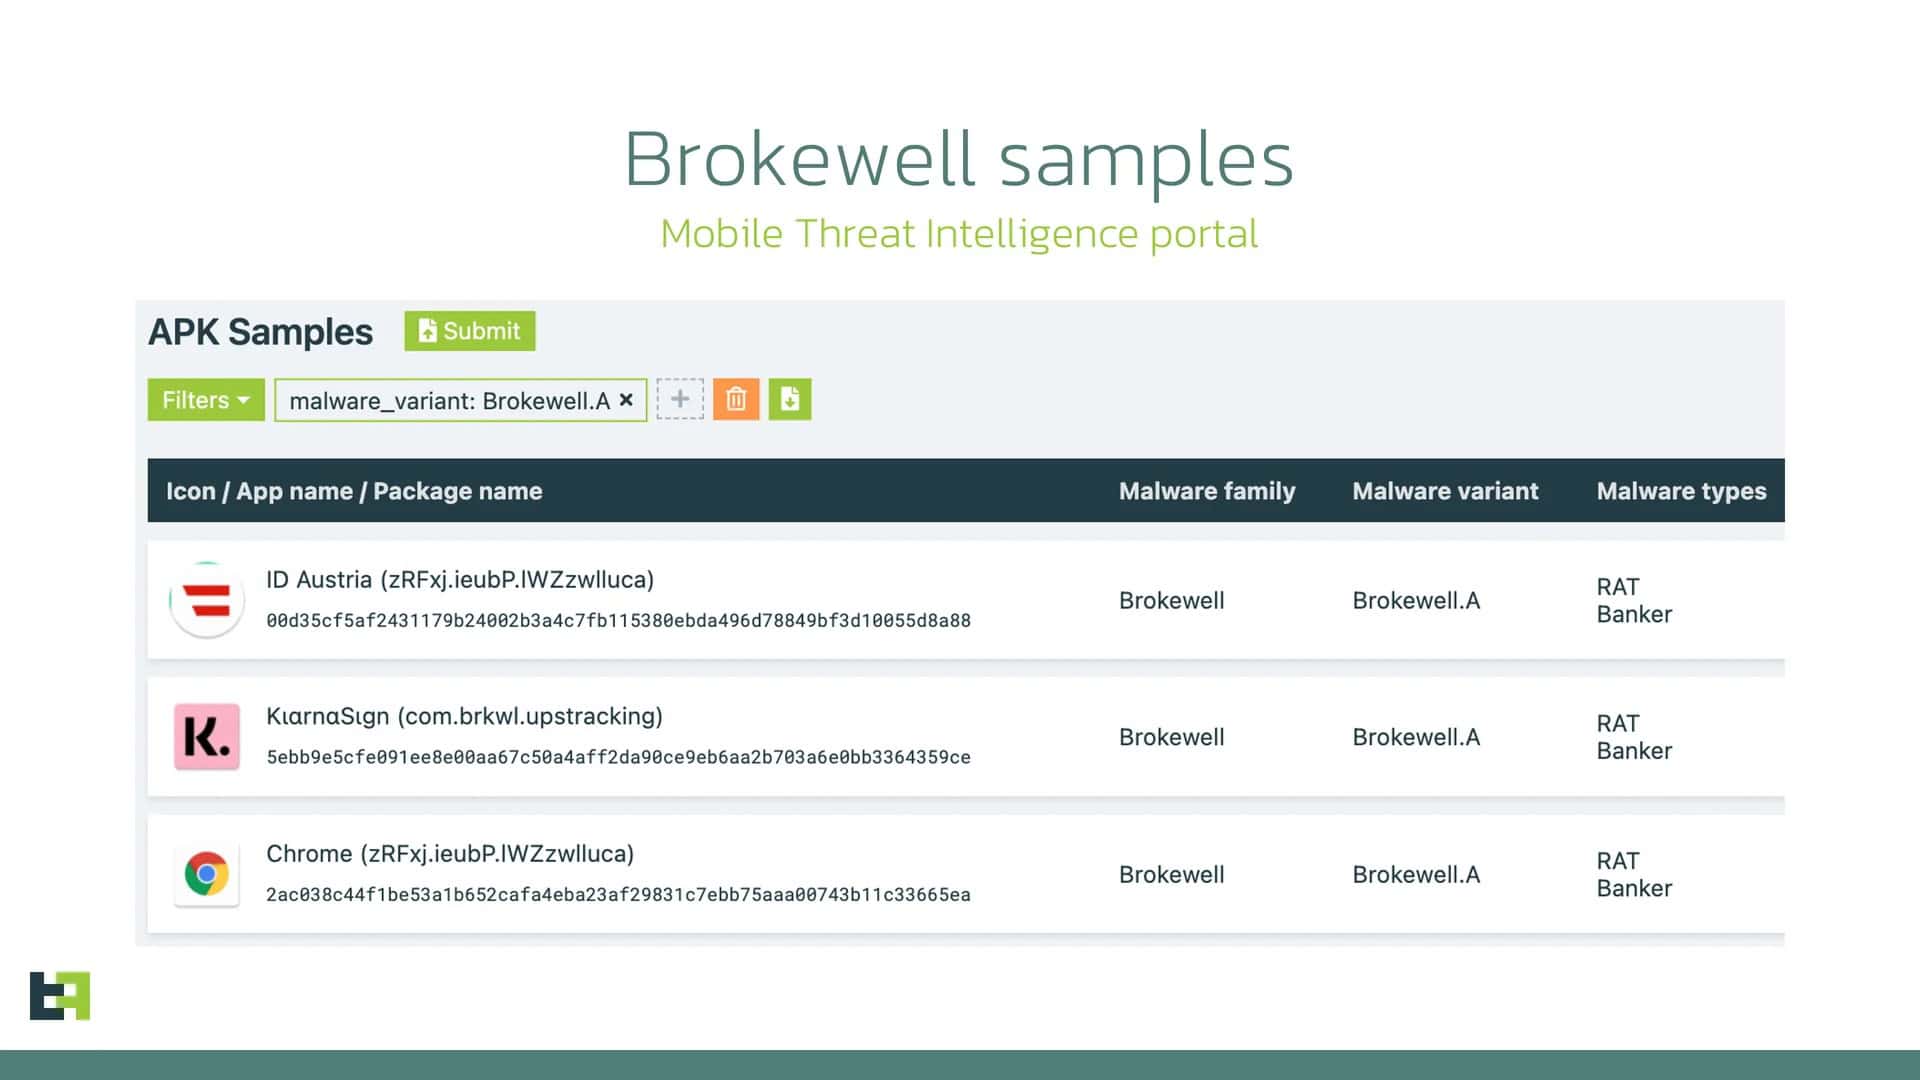 Brokewell Android malware samples